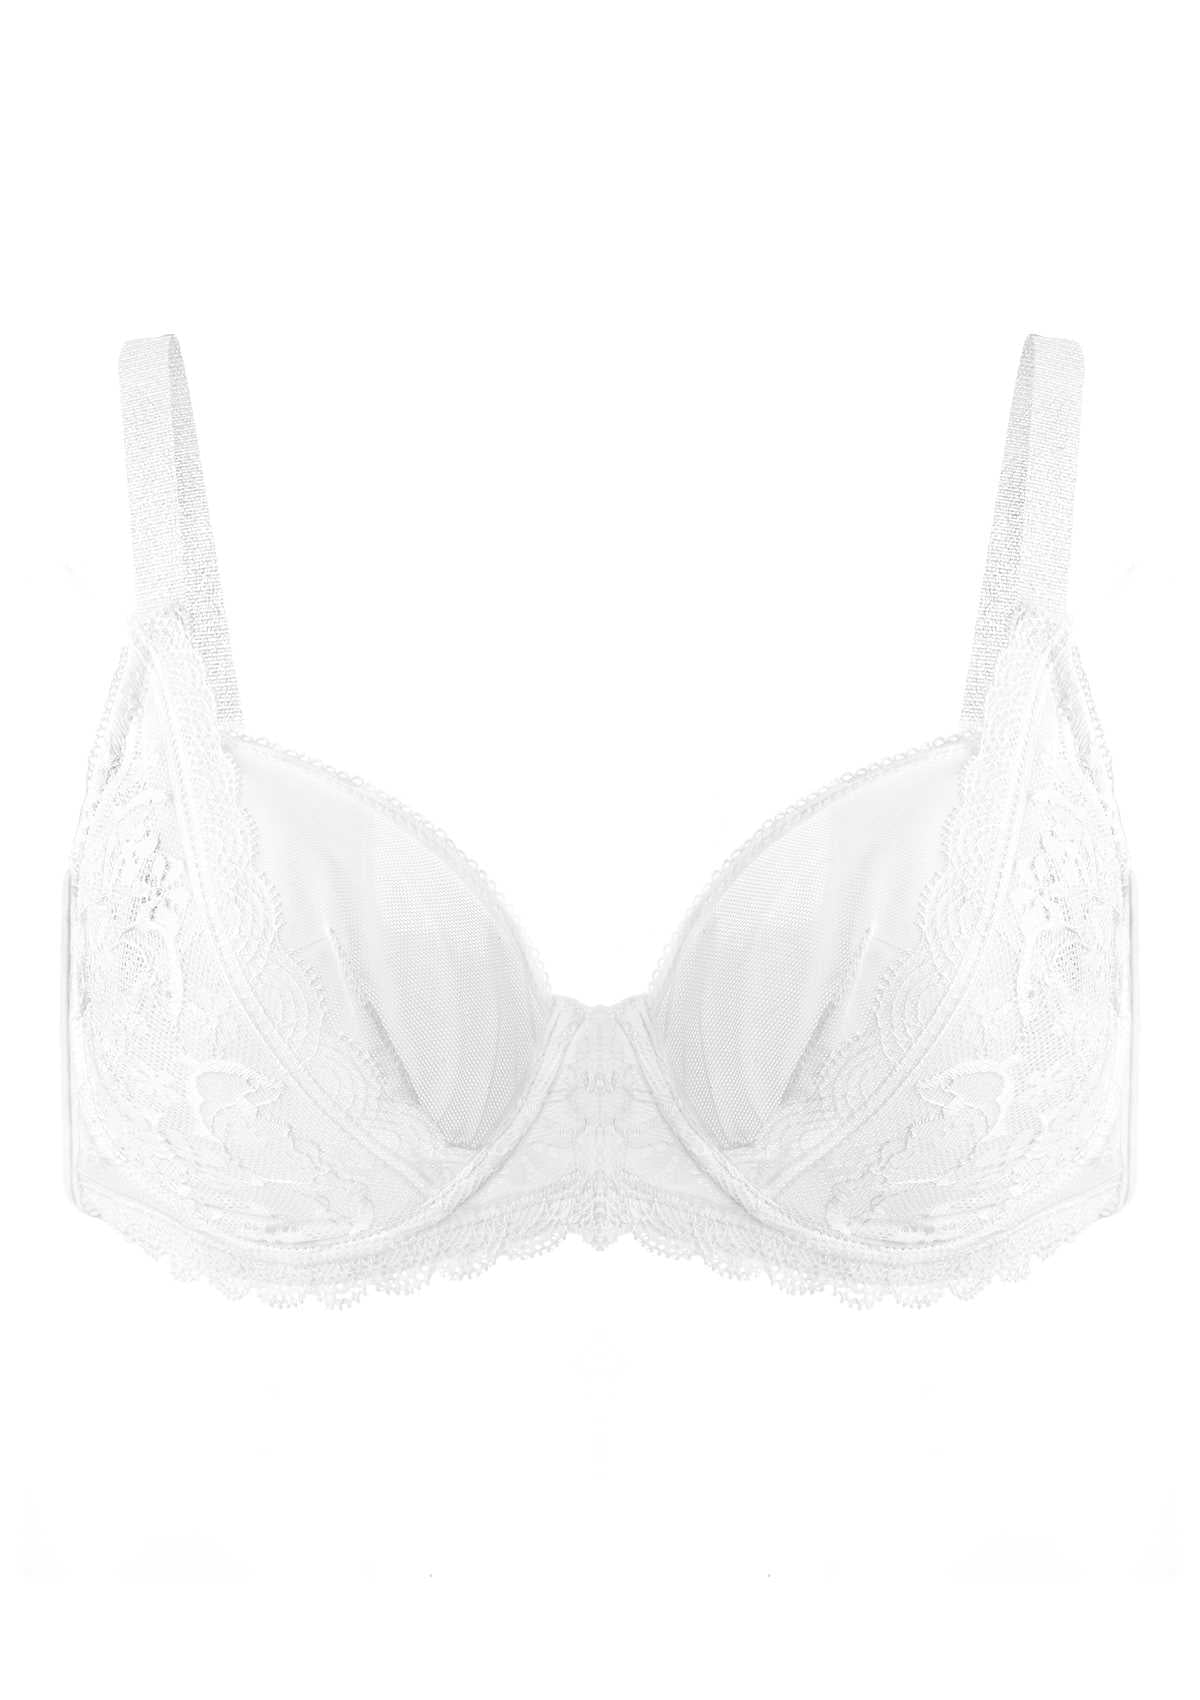 HSIA Anemone Big Bra: Best Bra For Lift And Support, Floral Bra - Light Blue / 36 / D